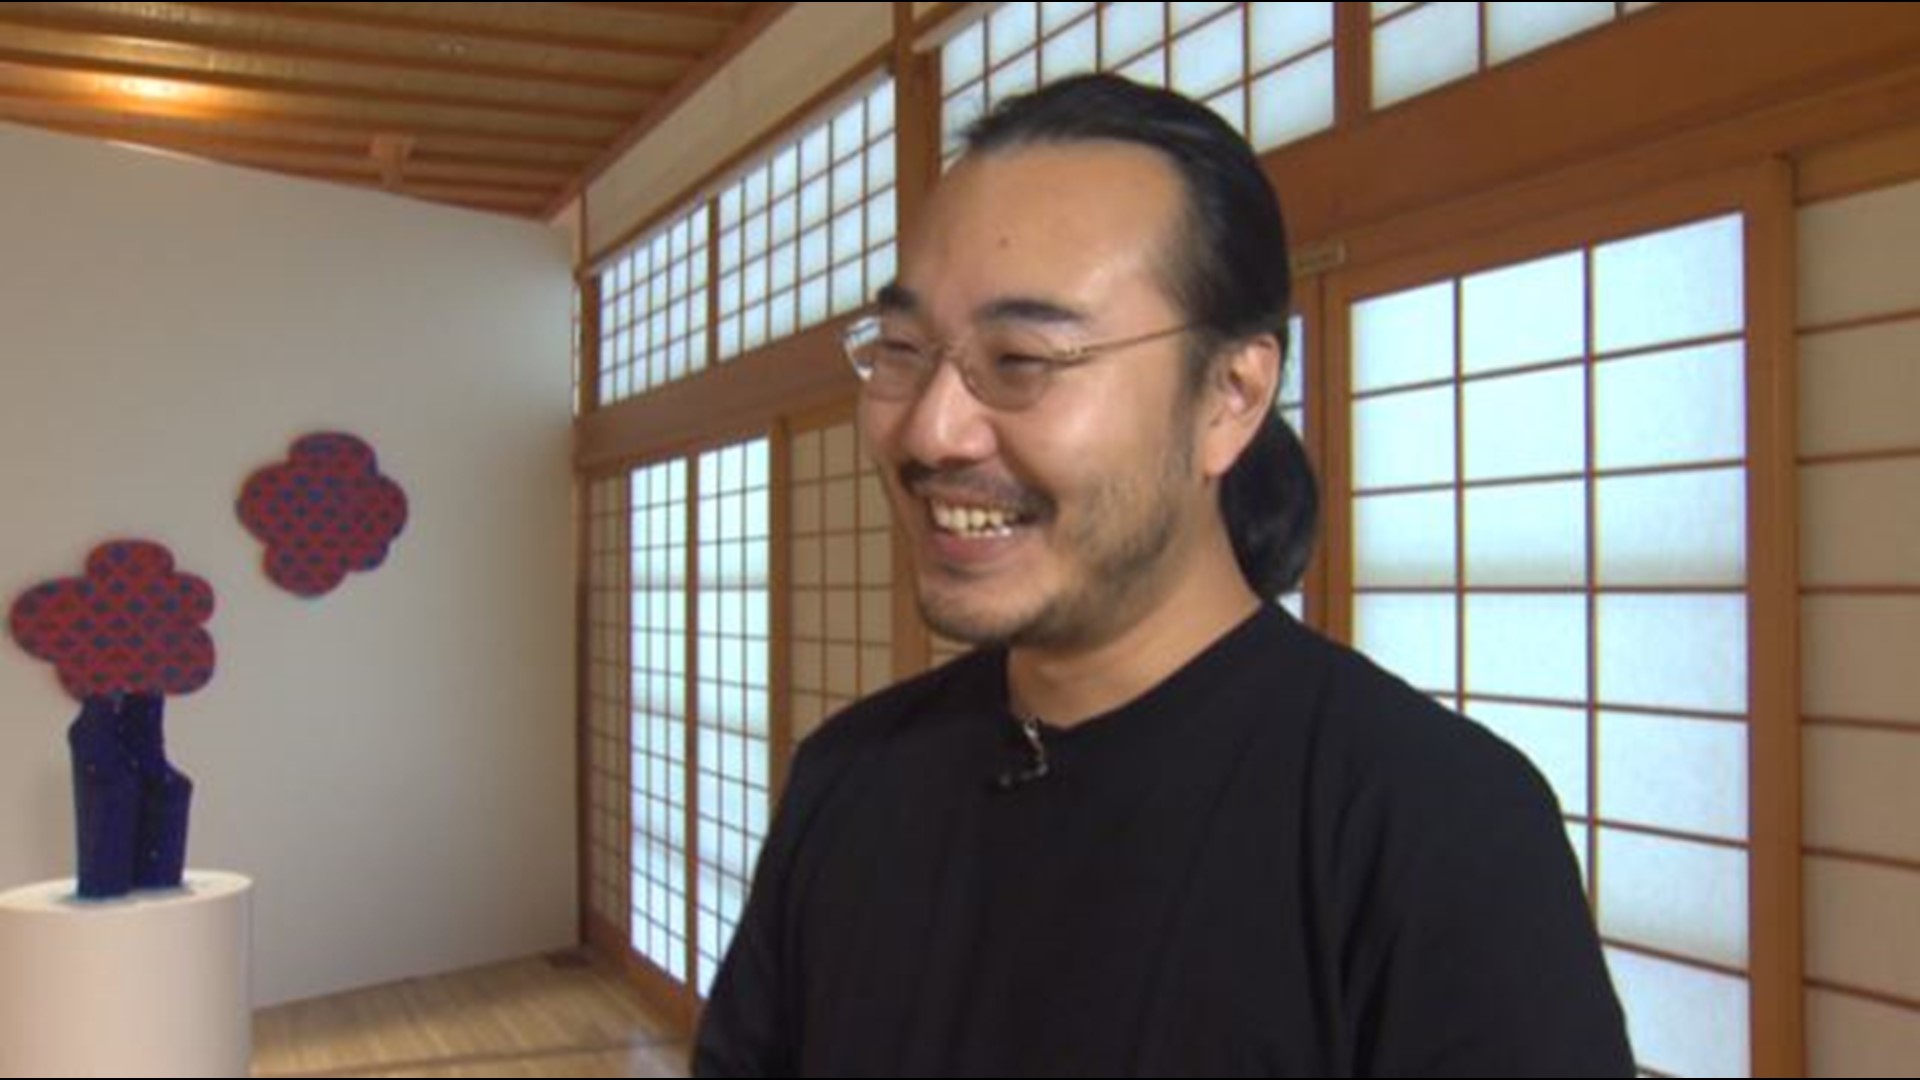 Noritaka Tatehana has been making beautiful art in Japan for years. Now, he has his first ever solo exhibition in North America, and it's in Portland.